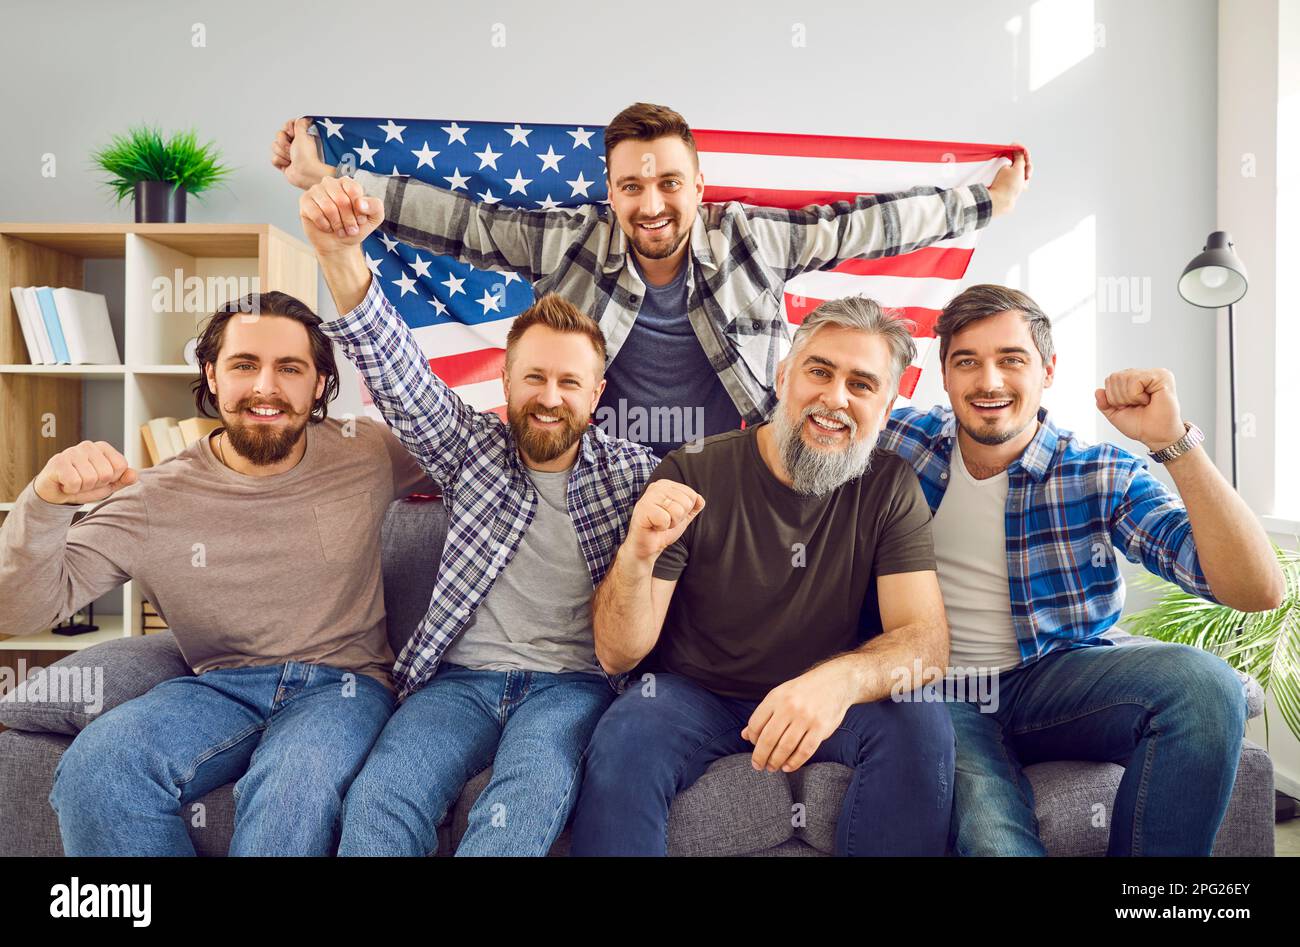 Group of Americans with flag sitting on sofa and watching soccer match on television Stock Photo